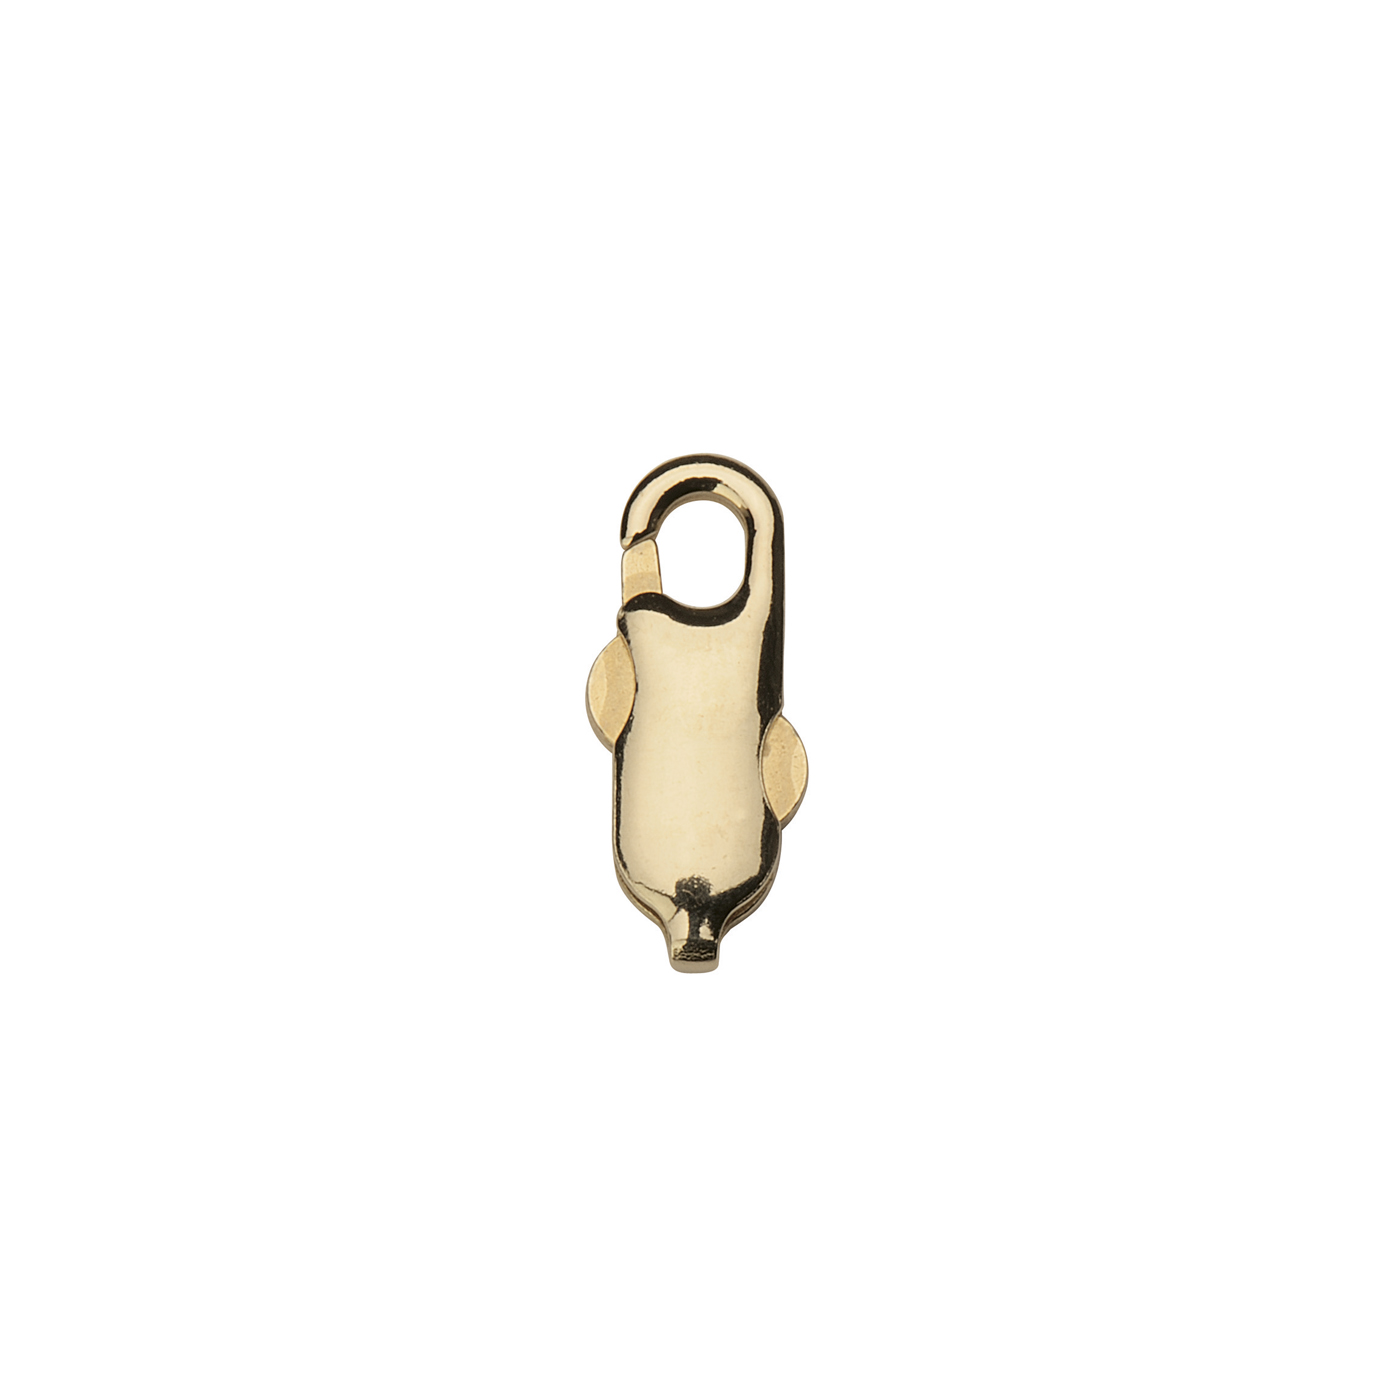 DP Lobster Clasp, 585G, 13.5 mm - 1 piece